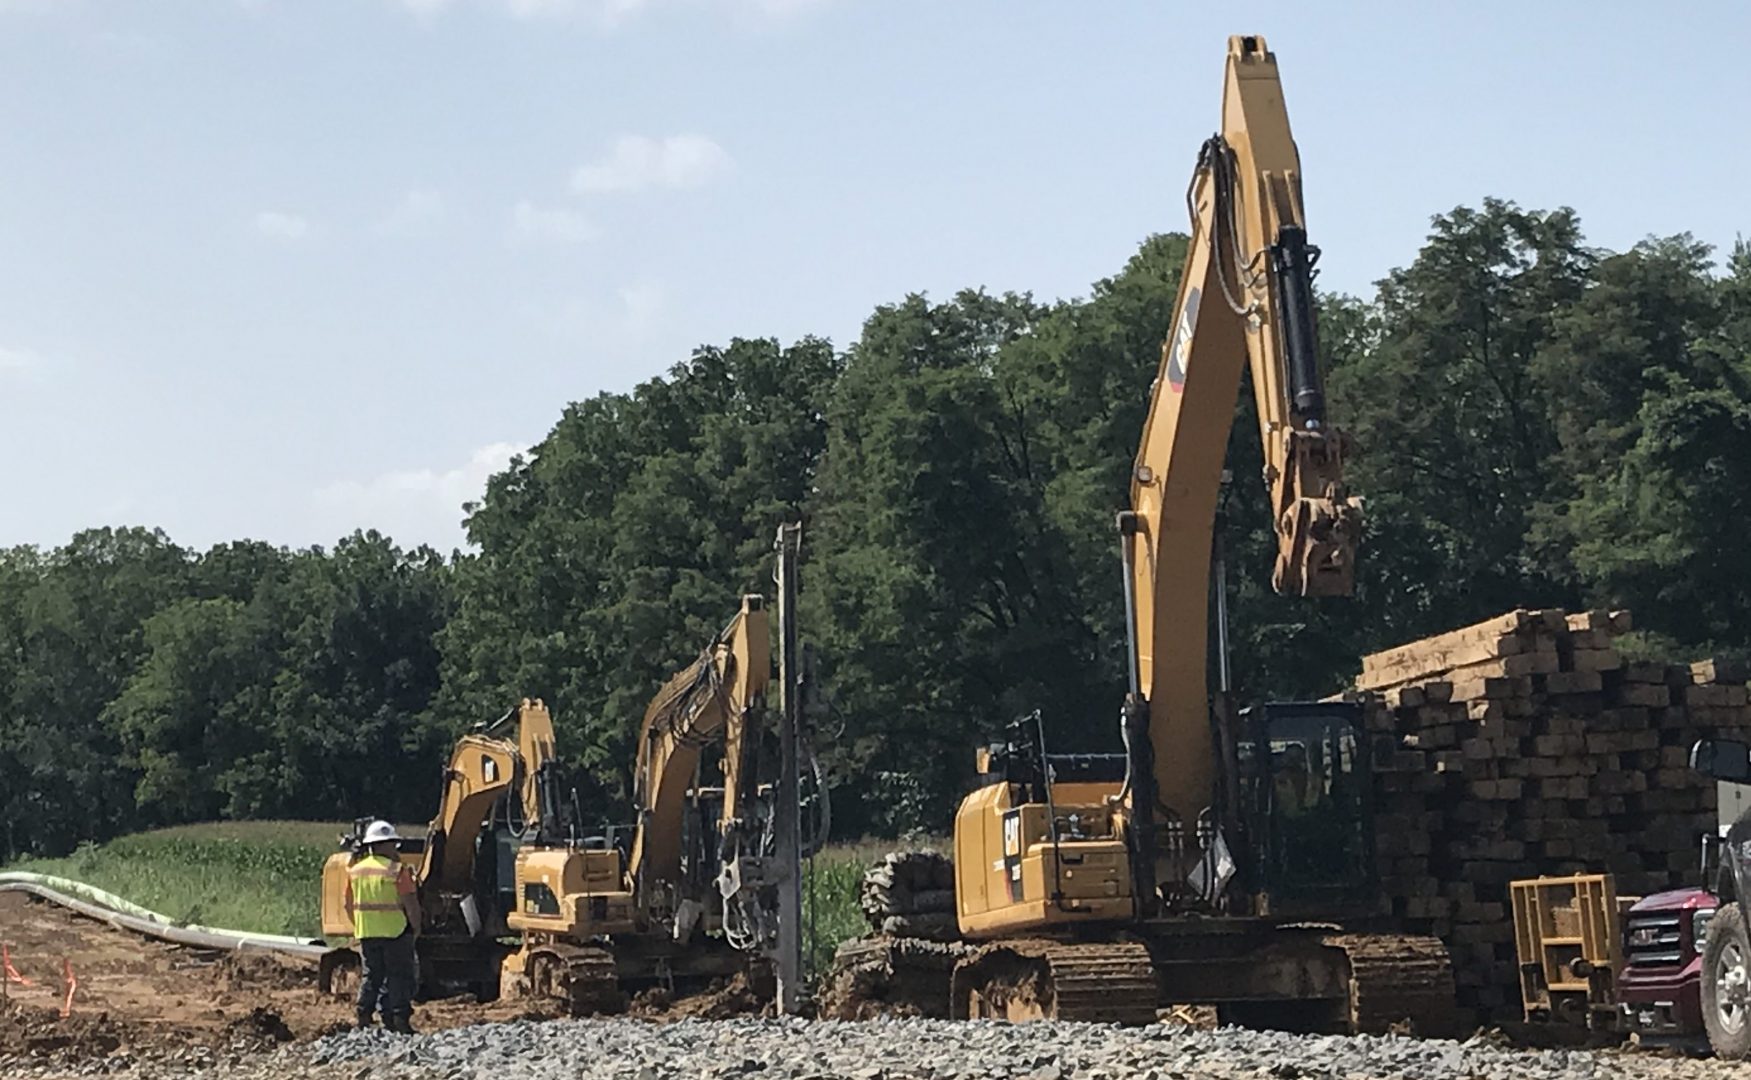 Workers installing the Mariner East 2 pipeline August 22, 2018 in Lebanon County. Energy Transfer Partners, parent company of Sunoco Logistics, had told investors that the line would be operational by the end of September. But regulatory issues have held it up.